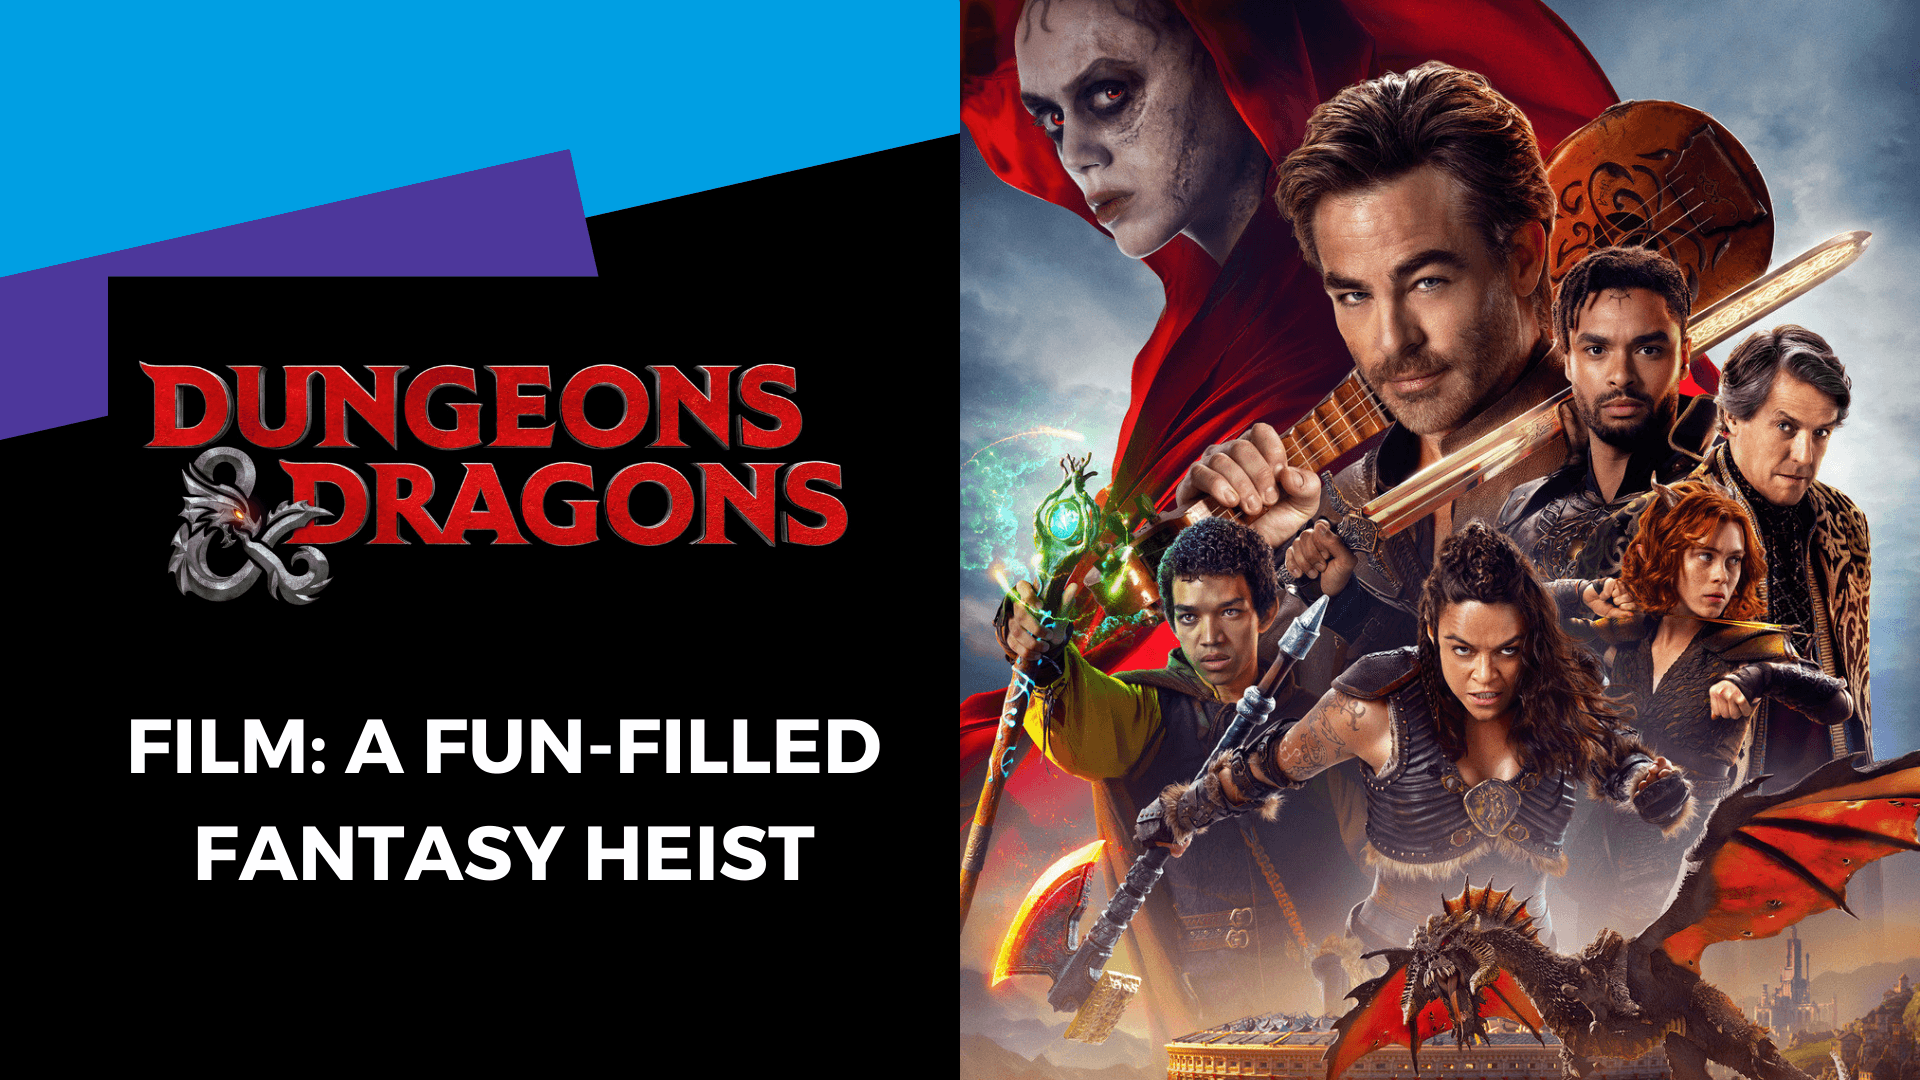 Dungeons and Dragons film: A fun-filled fantasy heist - Gamestate